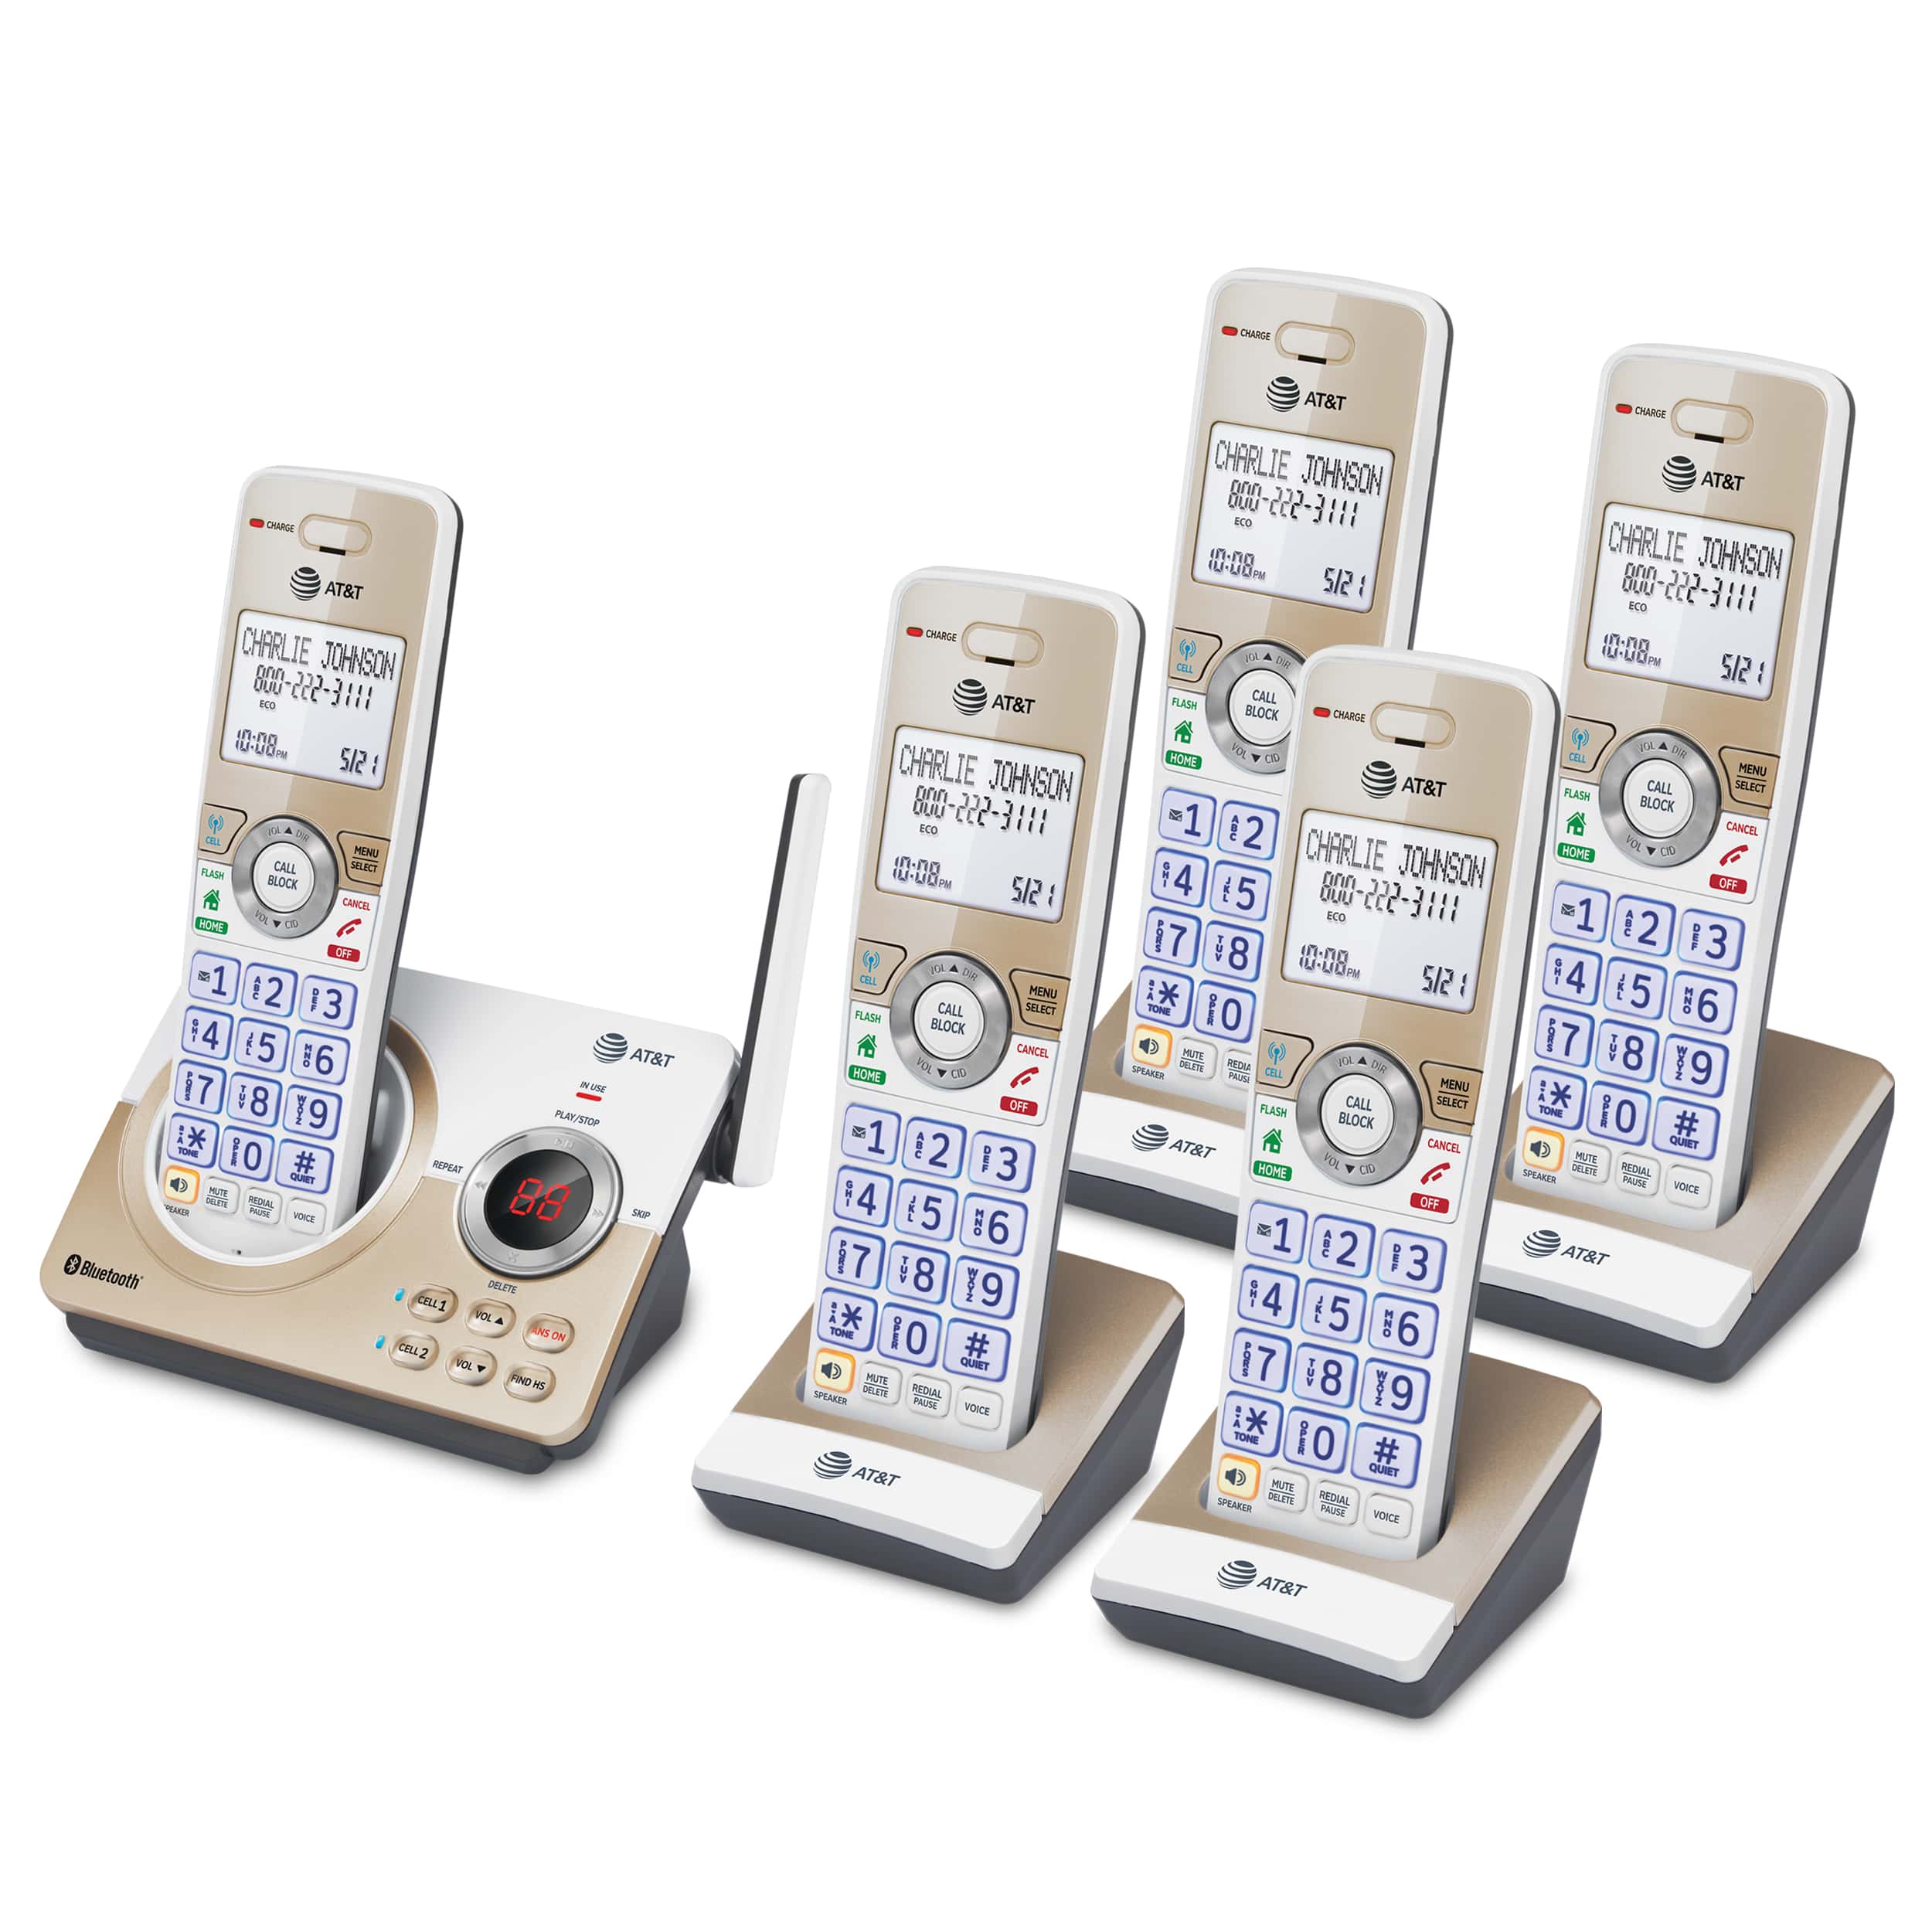 5-Handset Expandable Cordless Phone with Unsurpassed Range, Bluetooth Connect to Cell™, Smart Call Blocker and Answering System (Sliver) - view 3